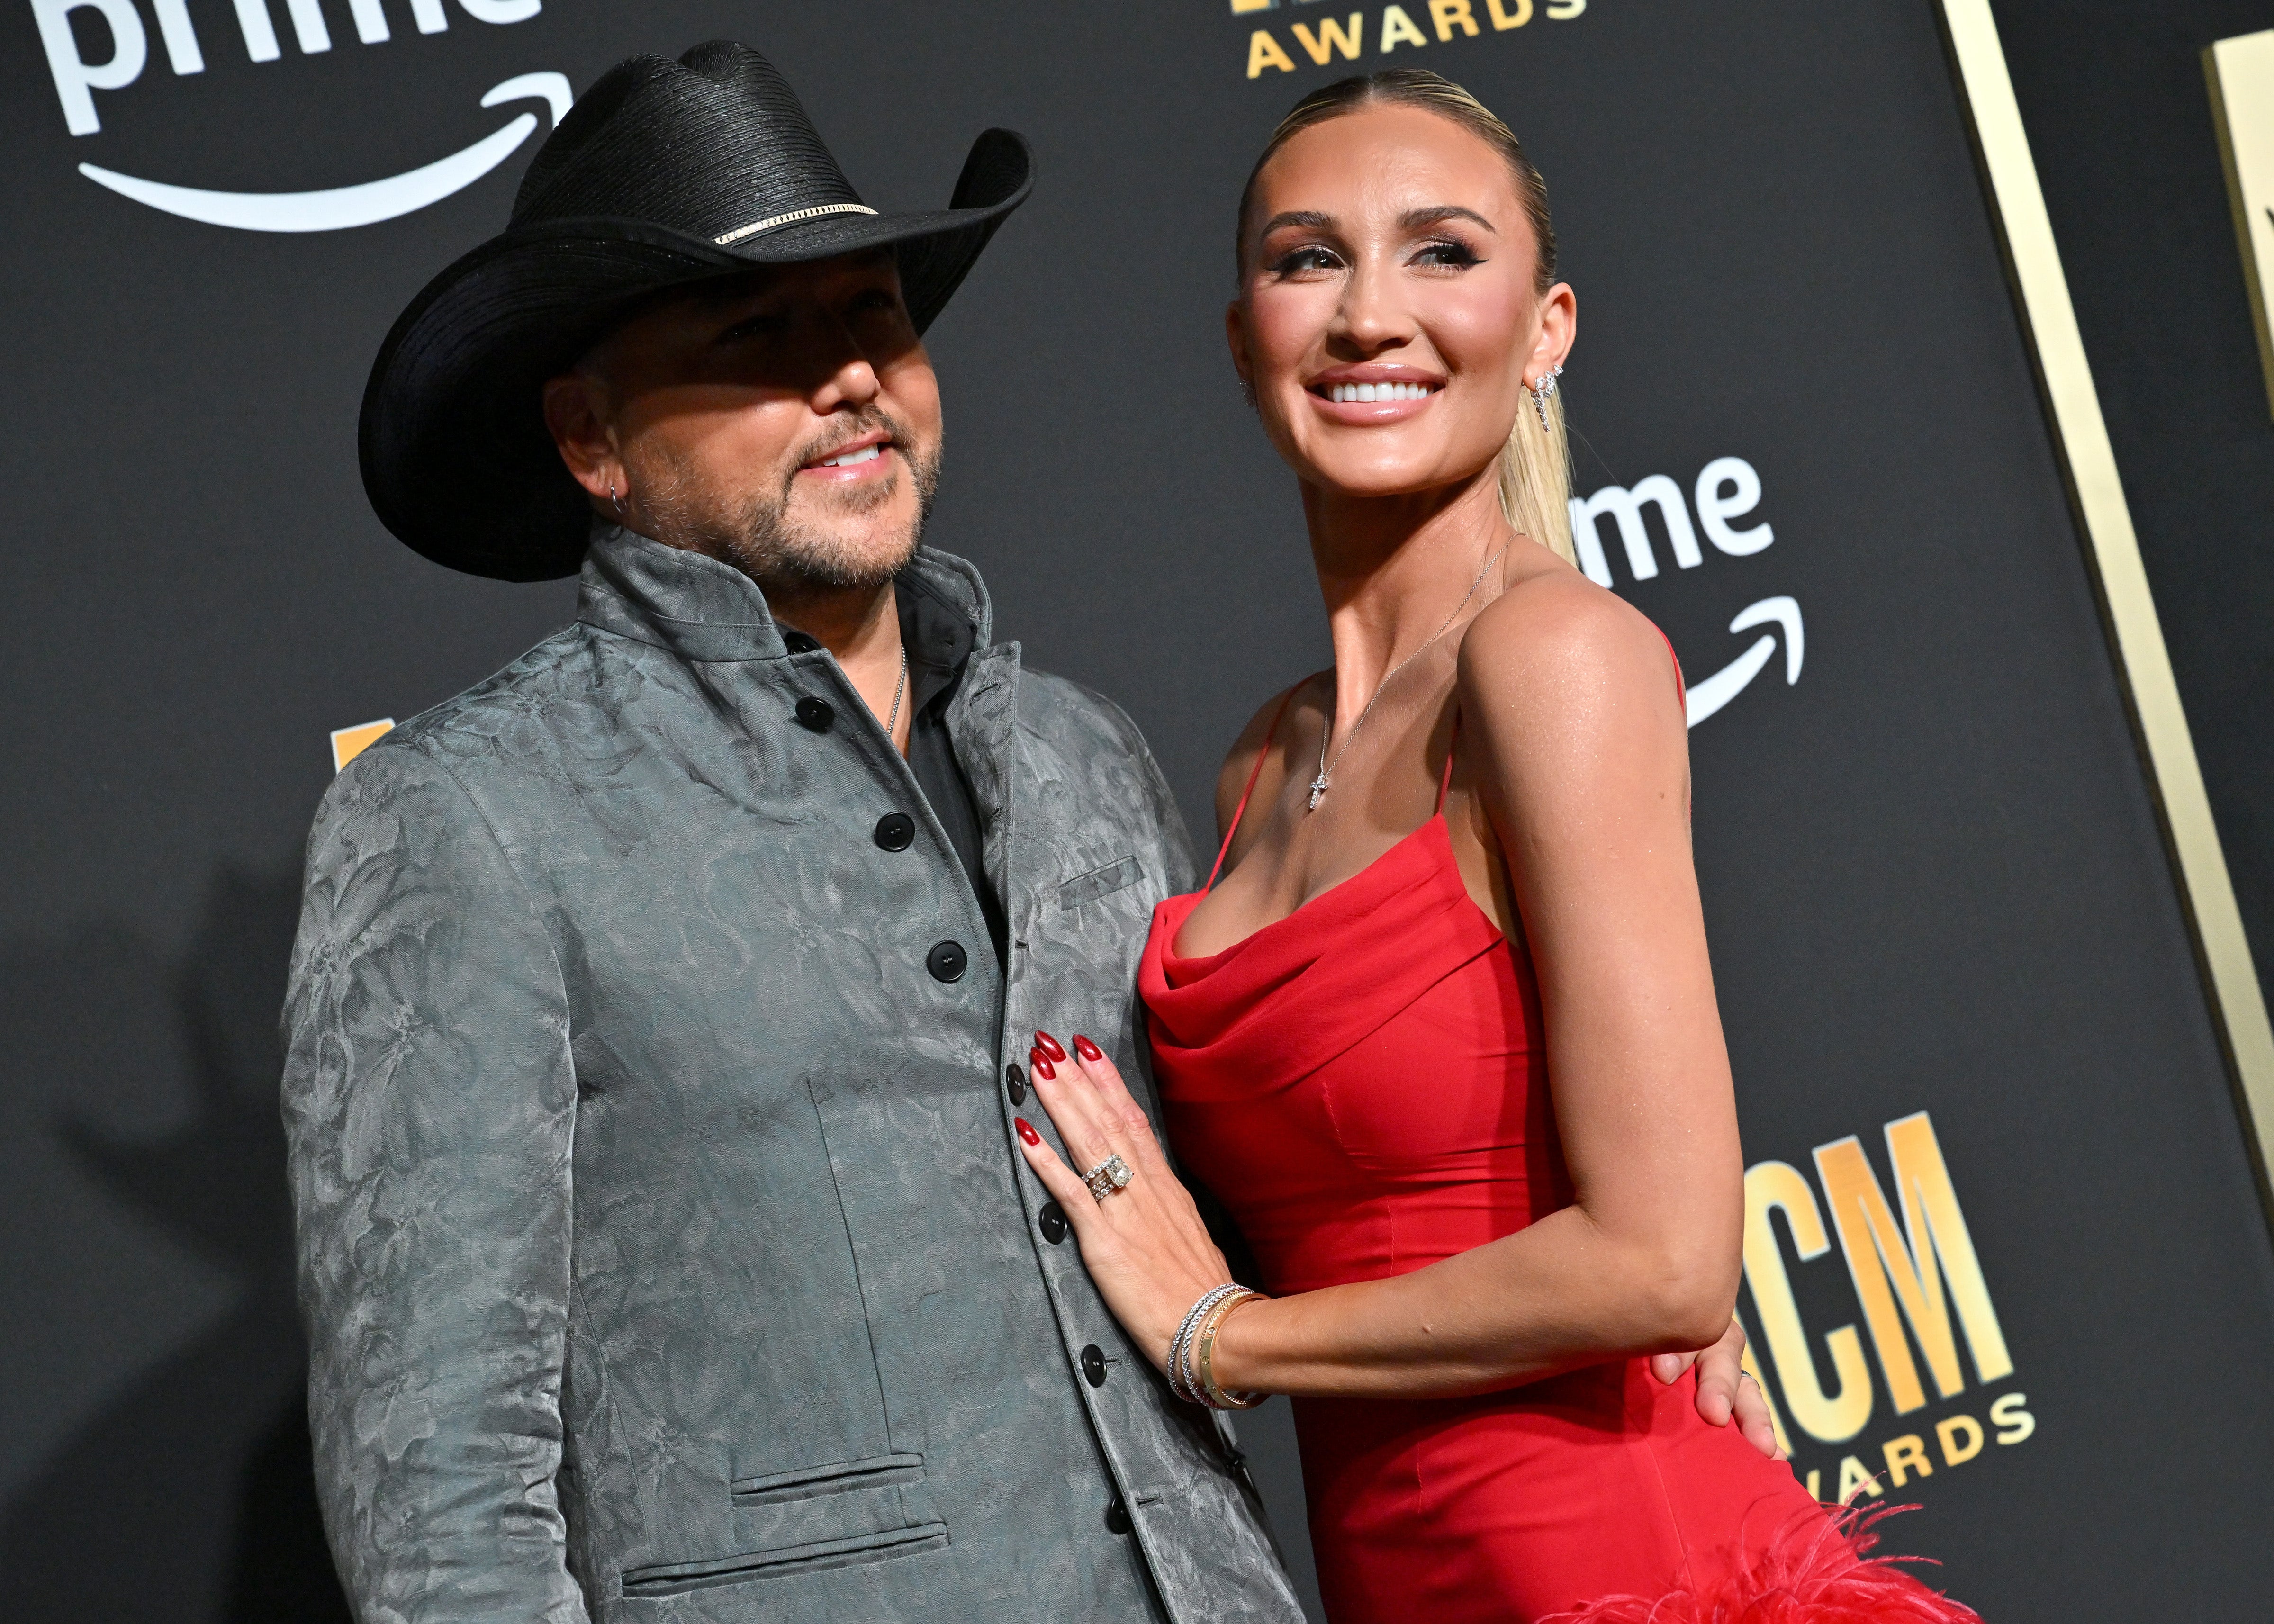 Jason Aldean in a suit and cowboy hat with Brittany Aldean in a red dress